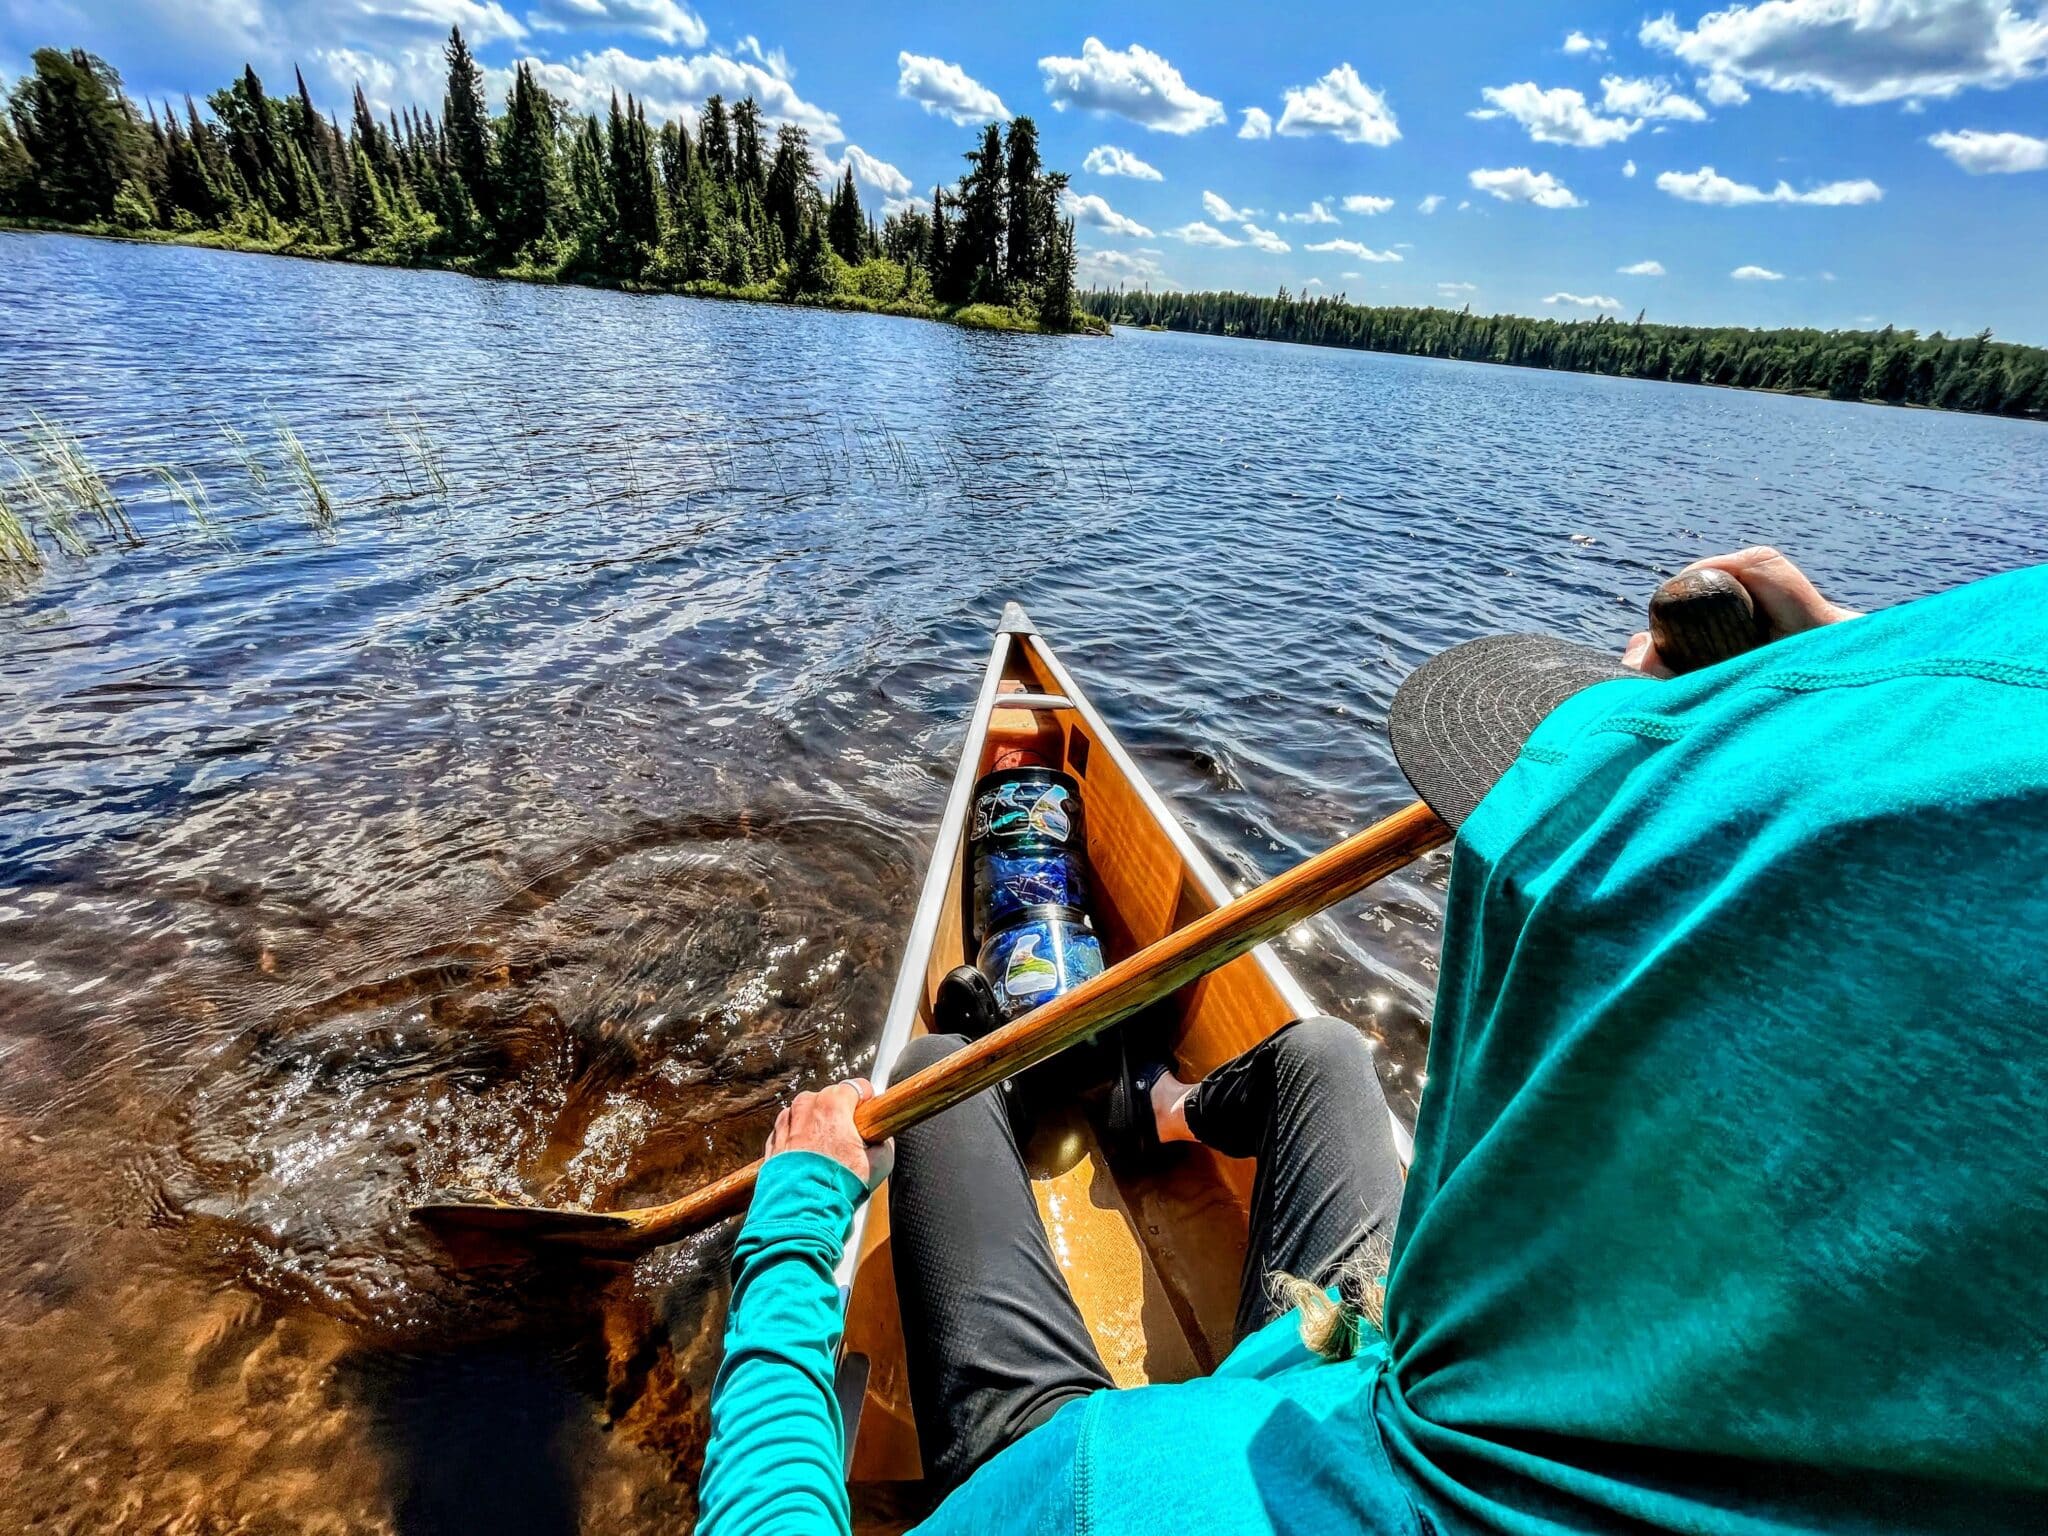 En savoir plus sur l'article Boundary Waters Canoe Area Wilderness: Planning a Family Trip (with little kids, too!)